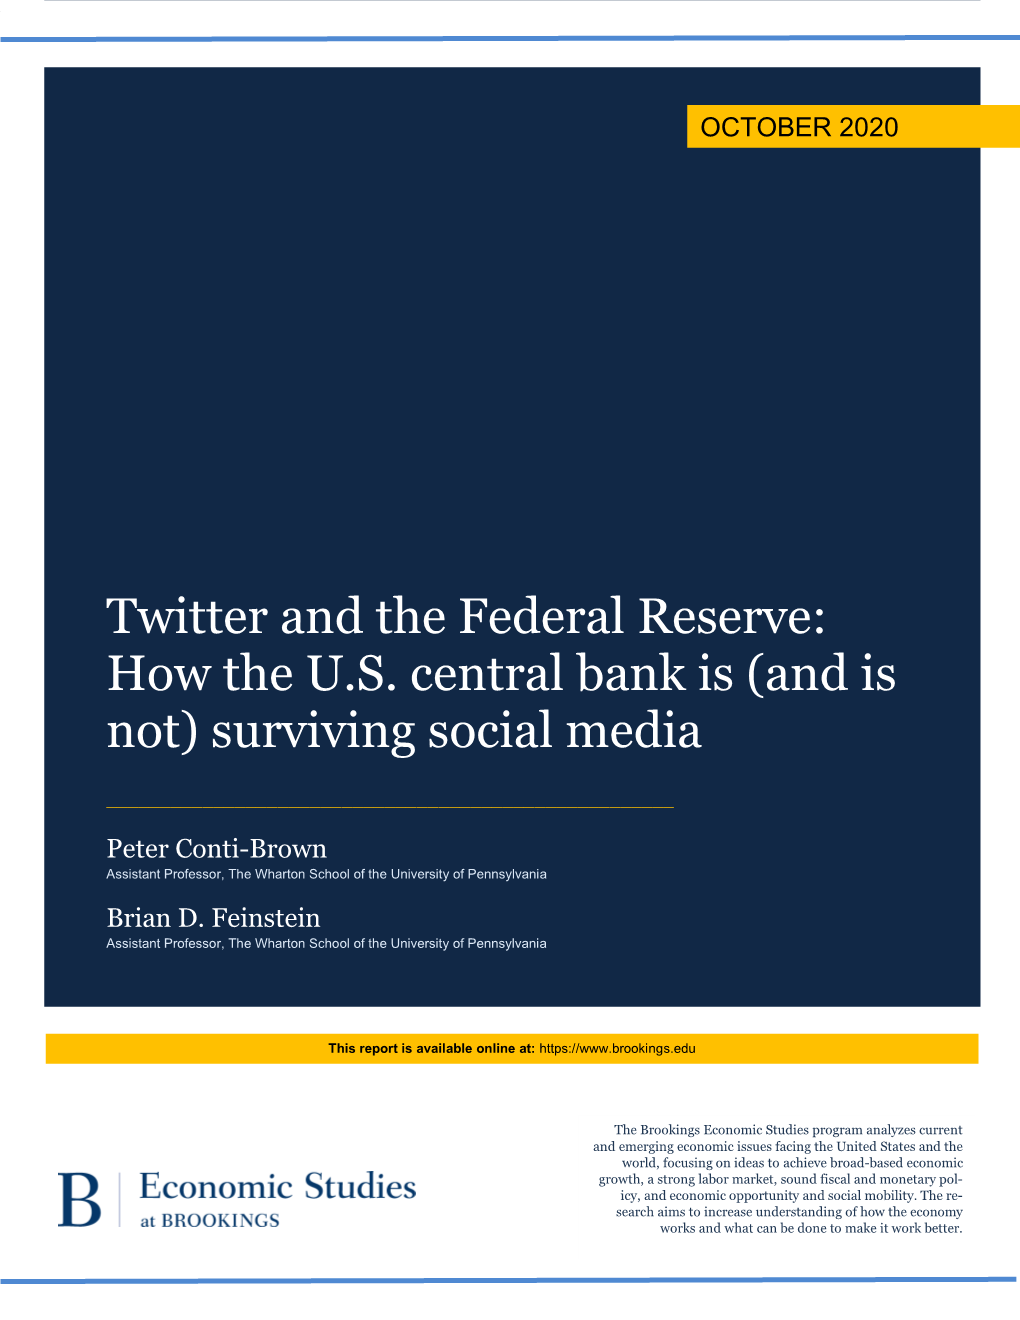 Twitter and the Federal Reserve: How the US Central Bank Is